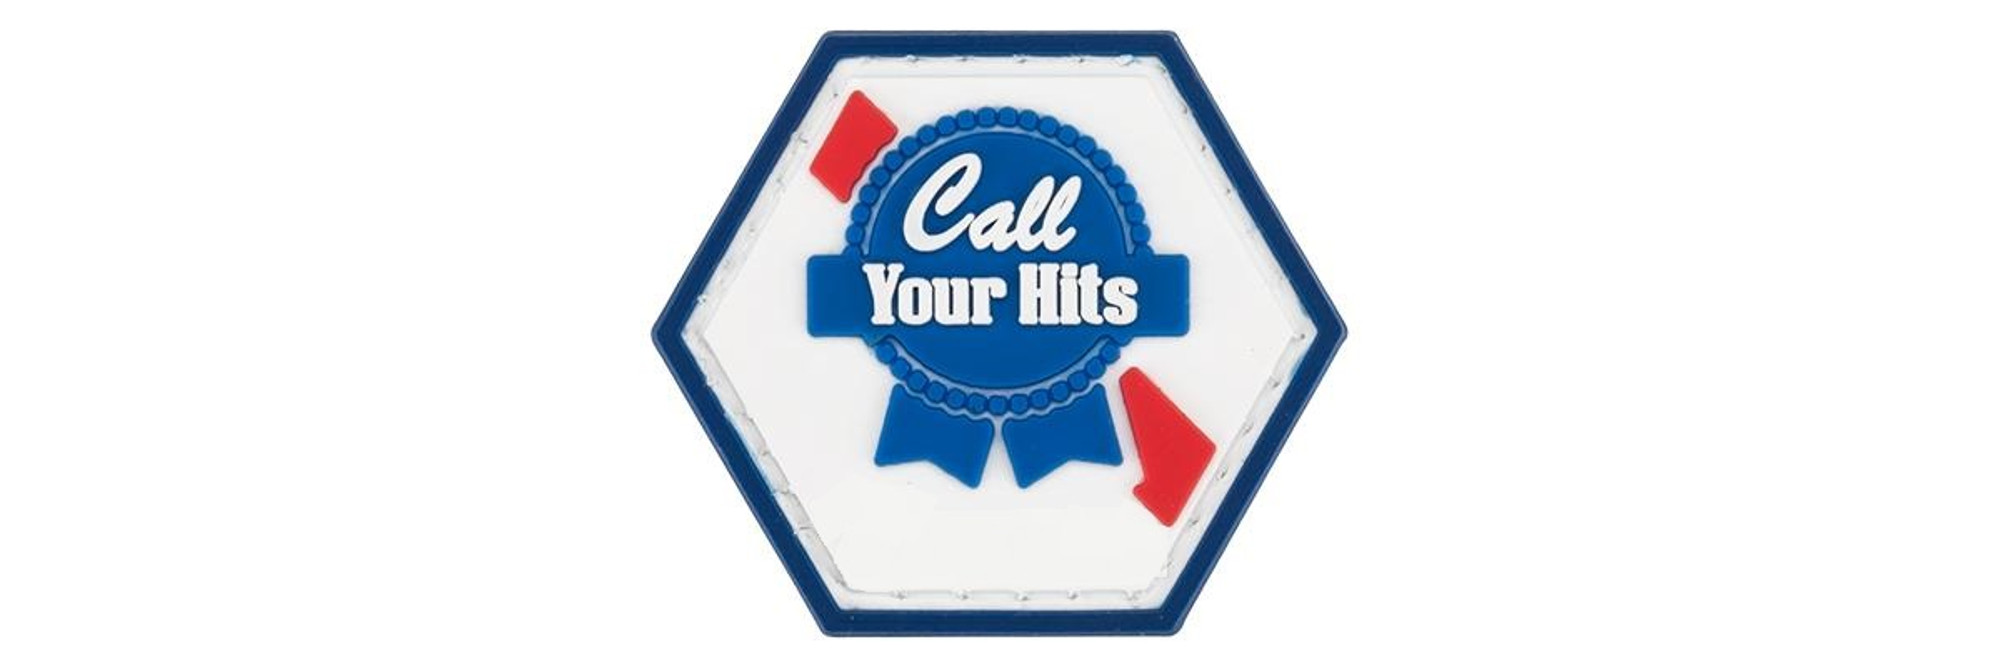 Operator Profile PVC Hex Patch Pop Culture Series - Call Your Hits